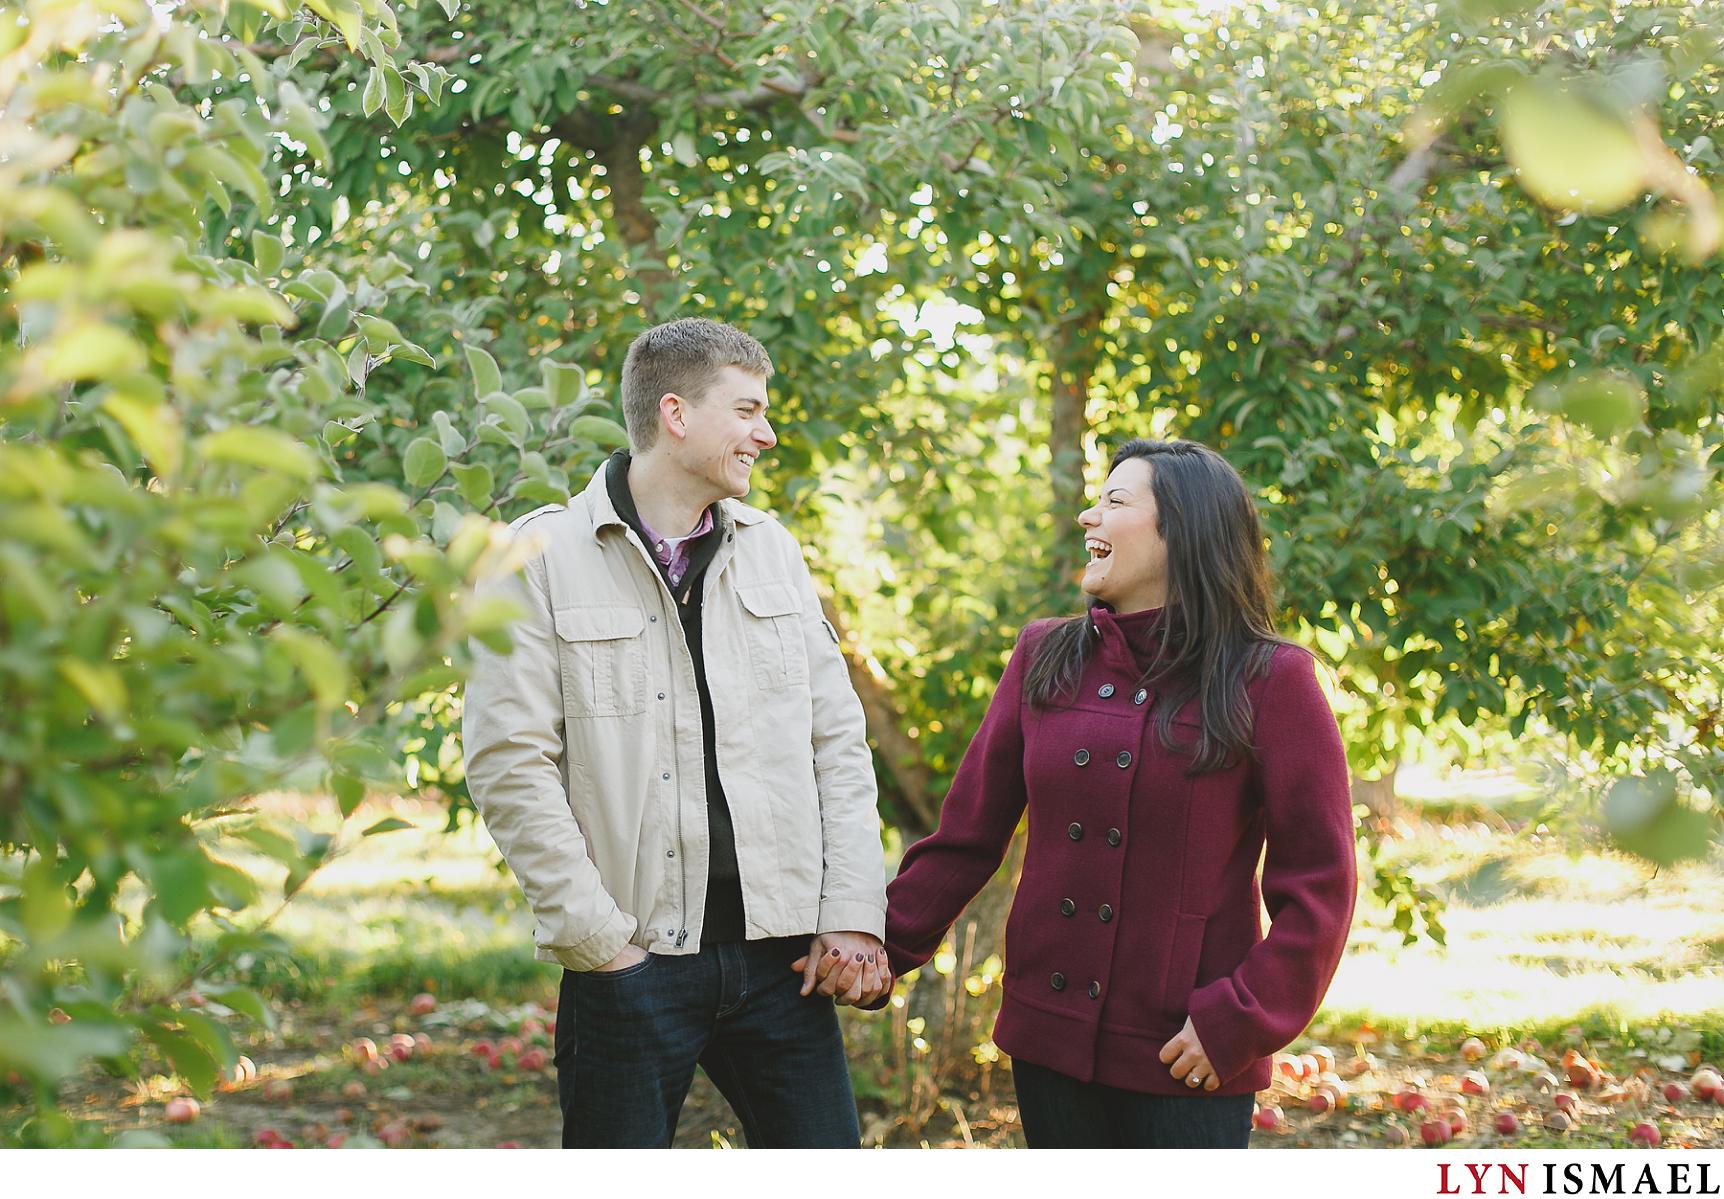 Deborah and Mike poses for their engagement session at an apple orchard in St Jacob's, Ontario